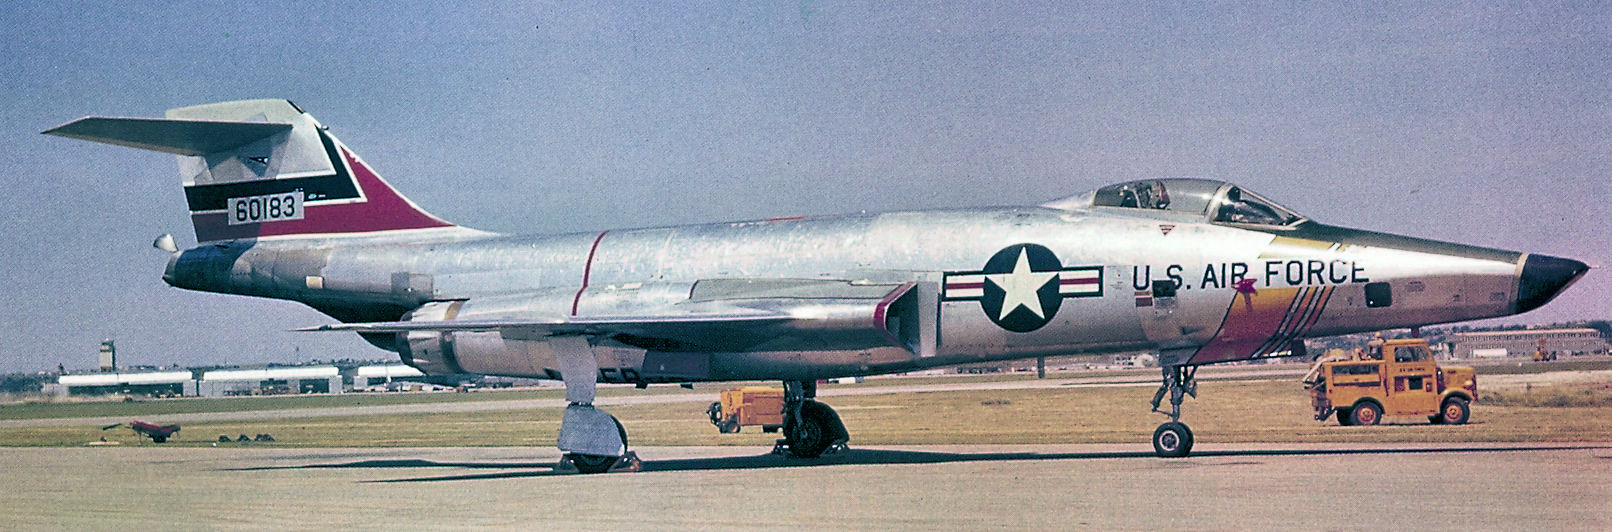 This McDonnell RF-101C-45-Voodoo, 56-0183, of the 20th Tactical Reconnaissance Squadron, is similar in appearance to the Voodoo flown by Captain Edwards, 15 April 1959. (Unattributed. 